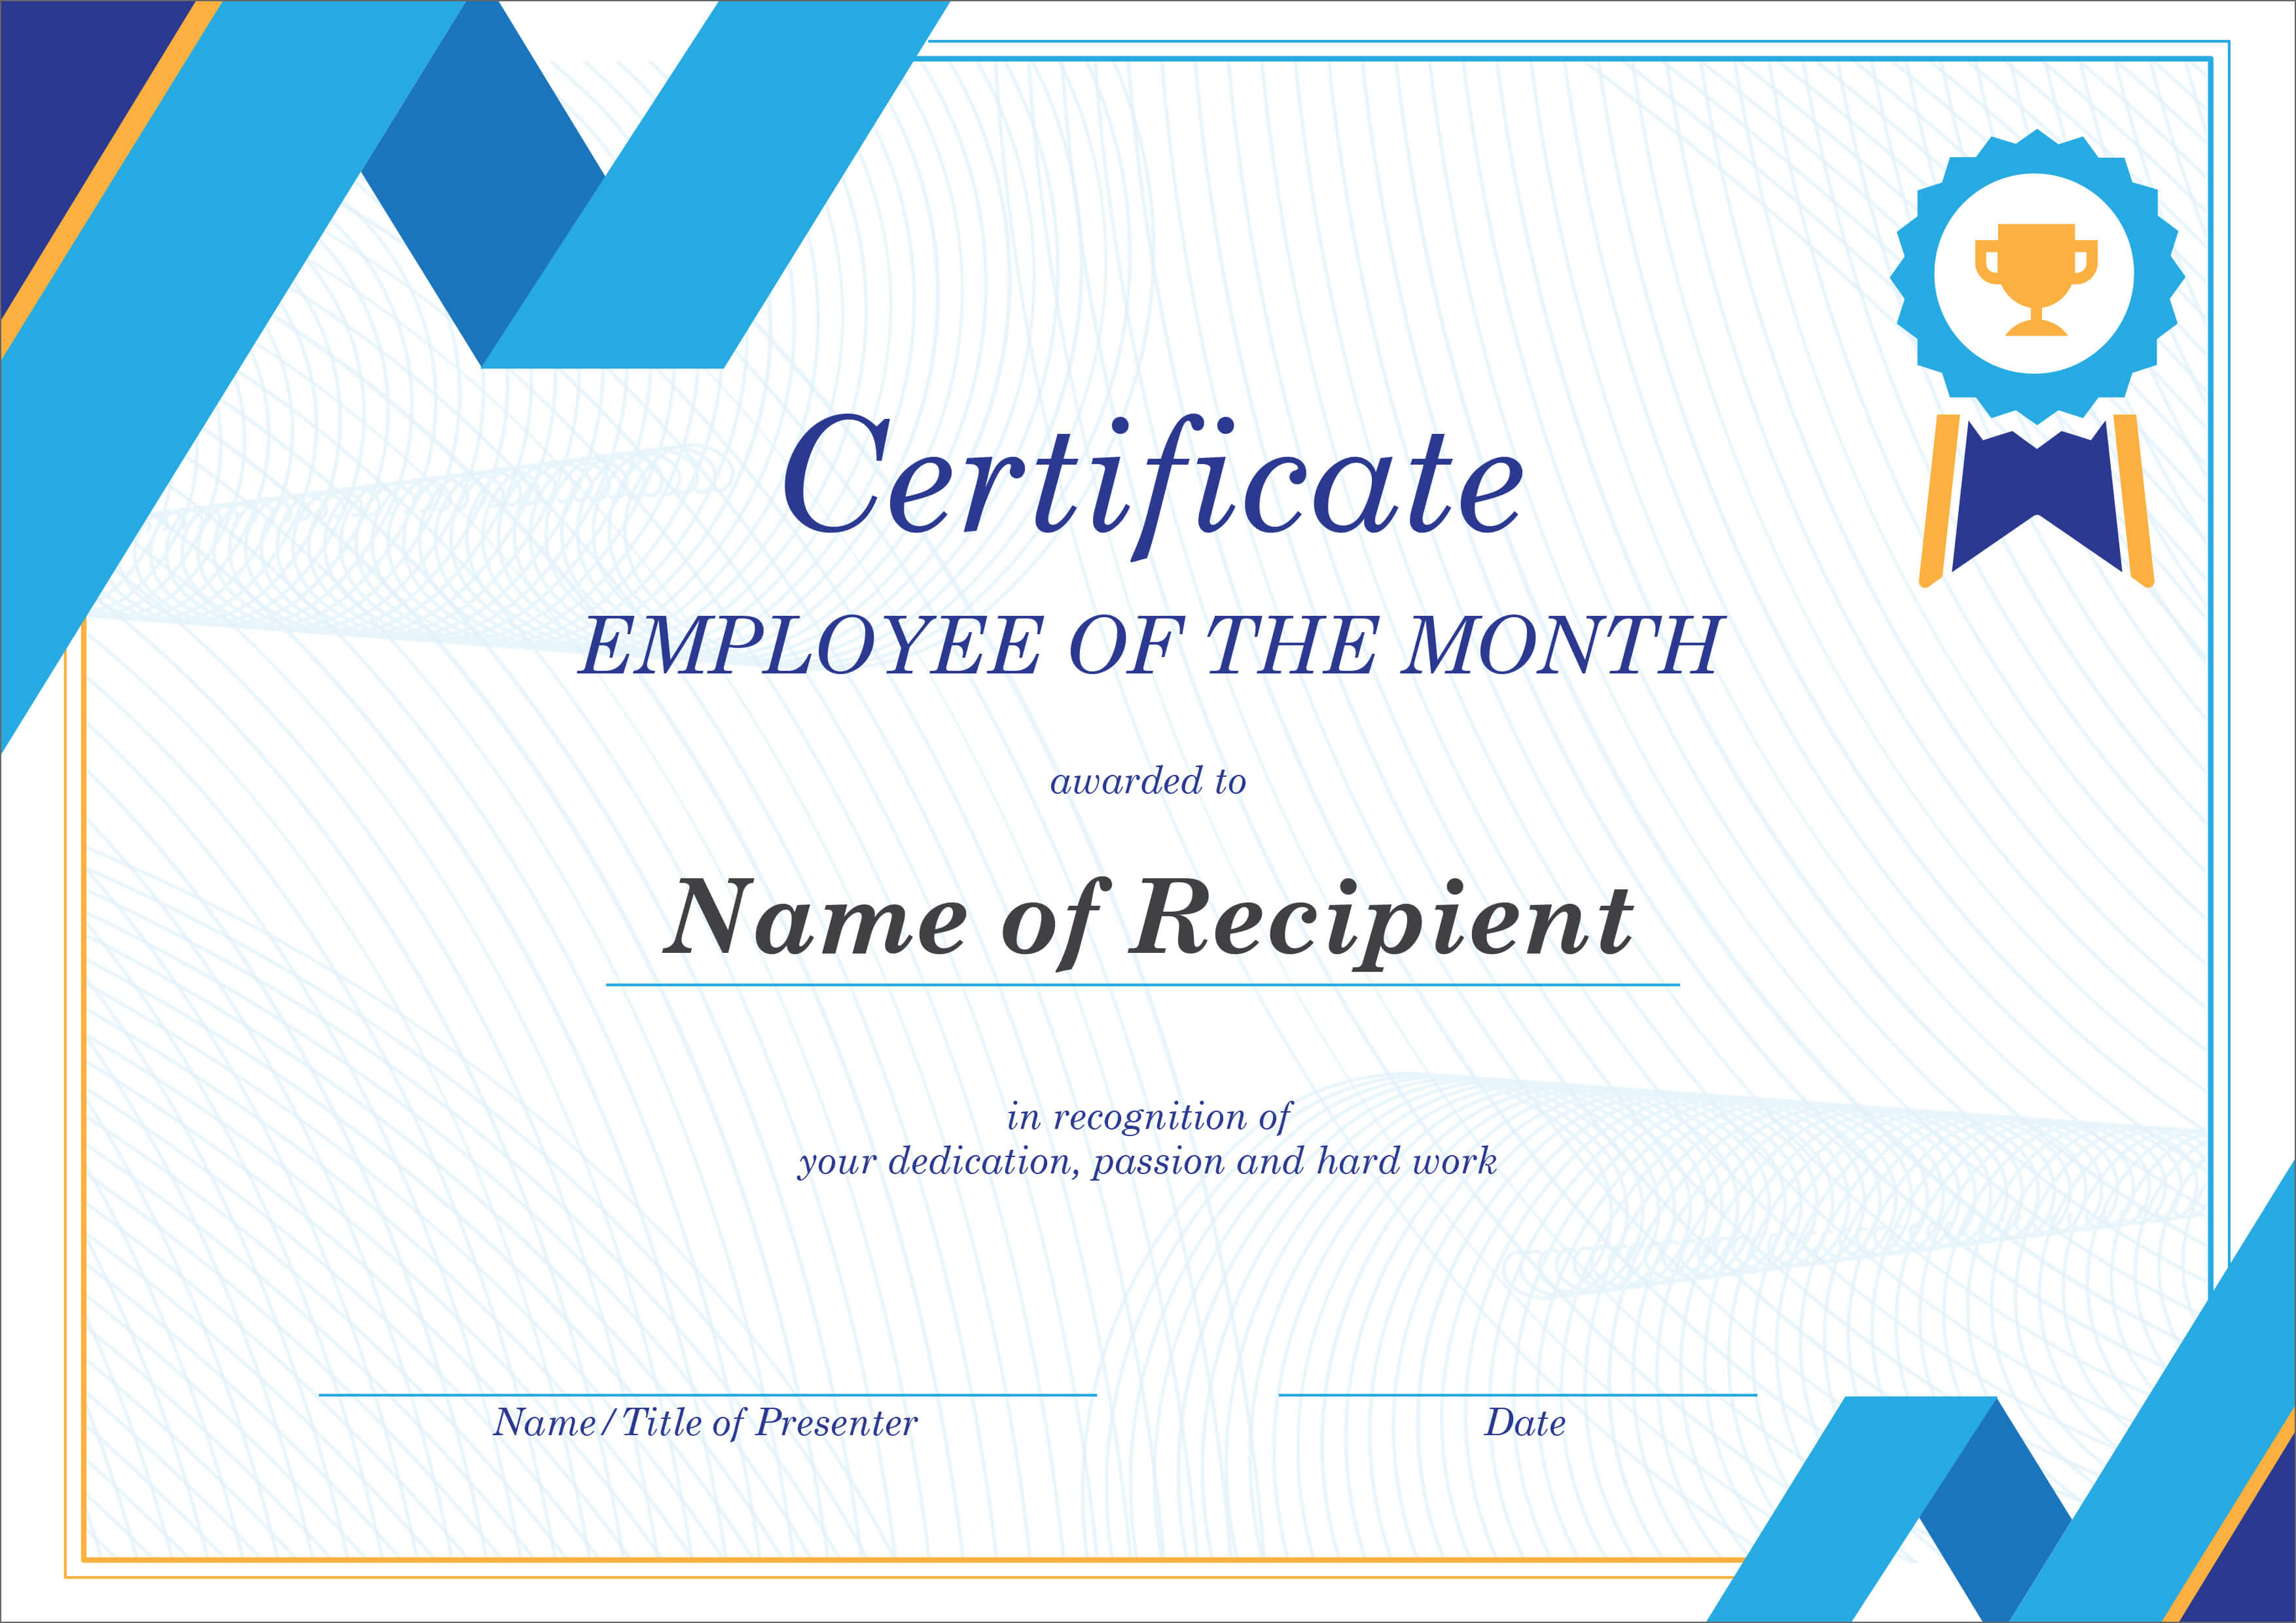 50 Creative Blank Certificate Templates In Psd Photoshop Within Employee Of The Month Certificate Templates